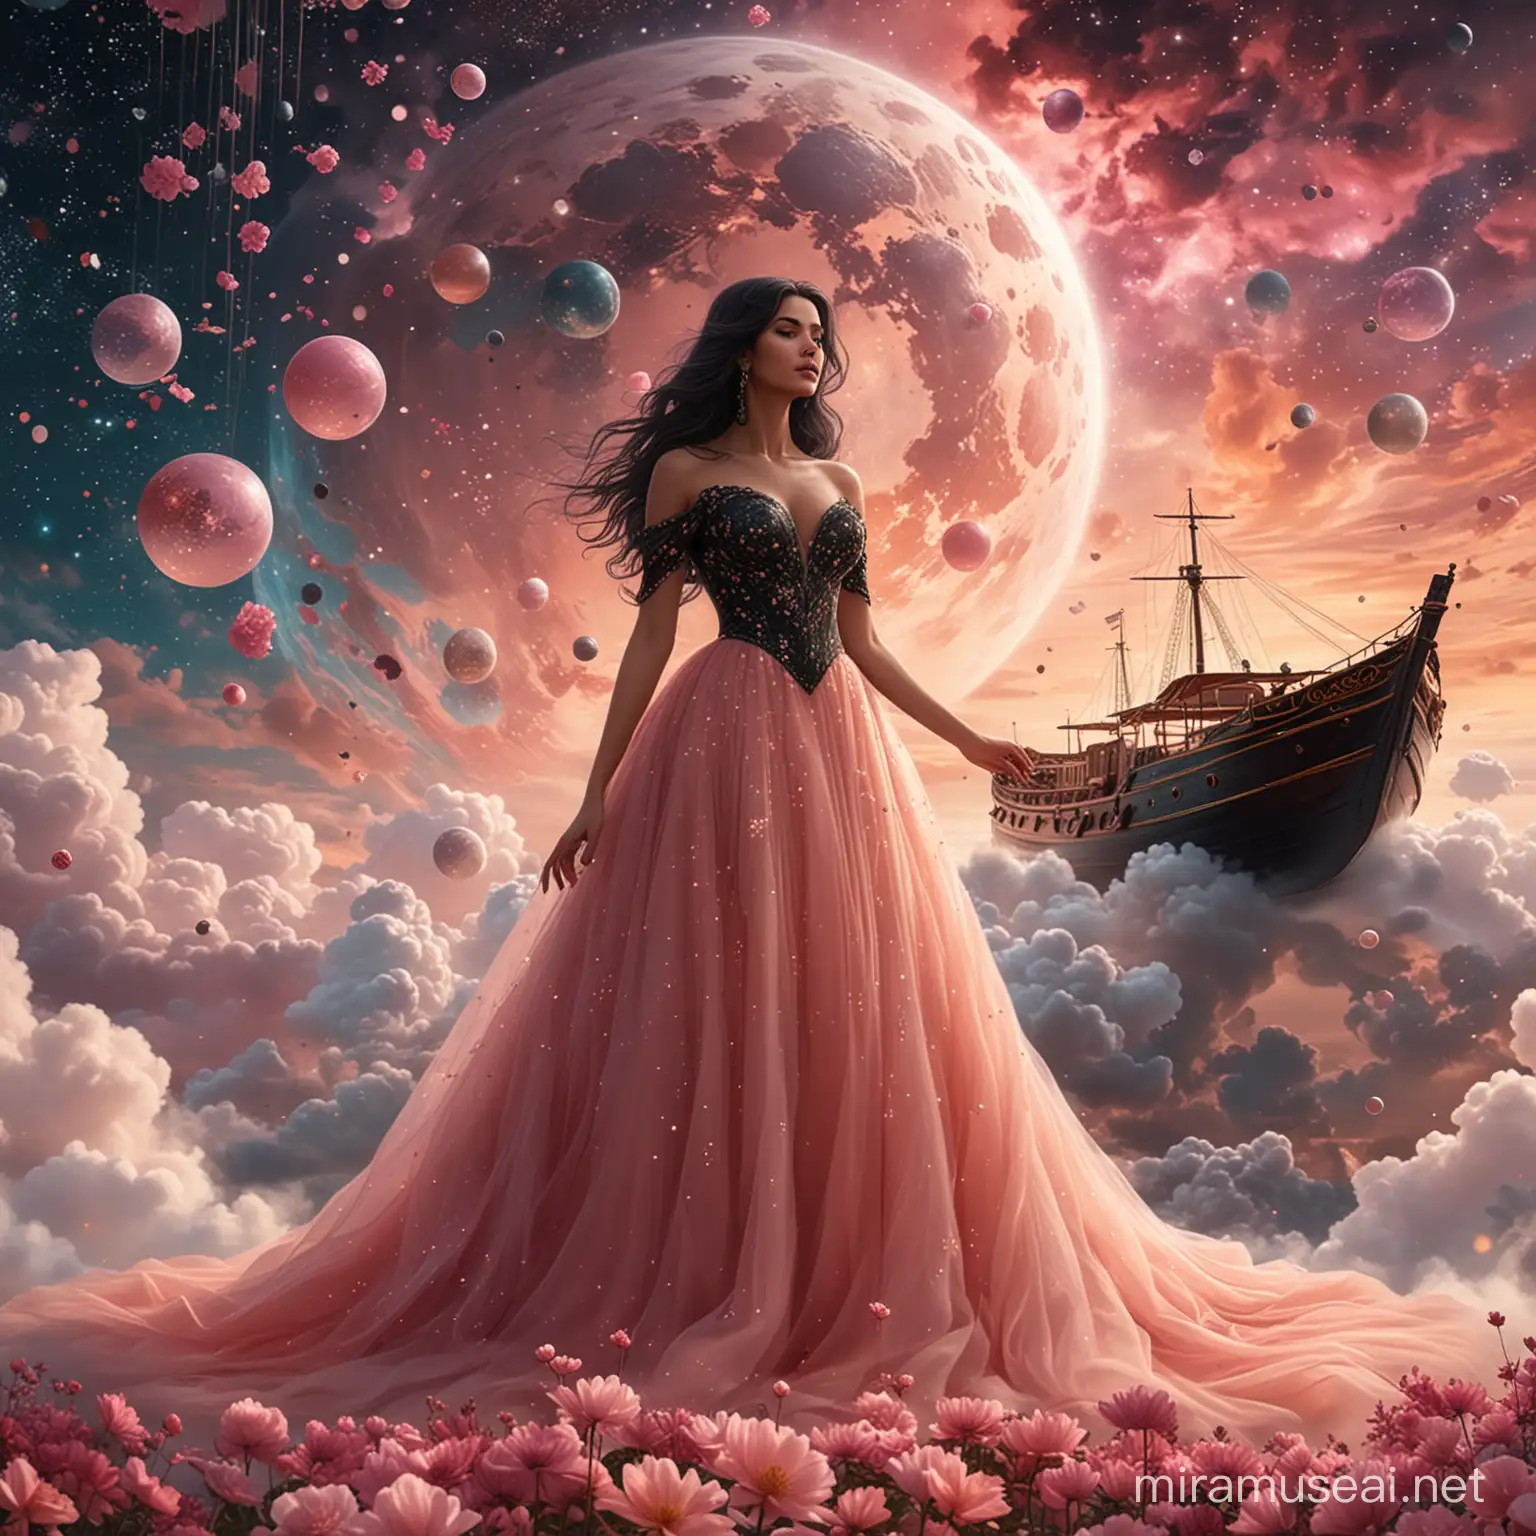 A beautiful woman, standing up on a cloud, collecting balls, surrounded by dark pink and beige flowers. Long wavy black hair. Elegant long salmon and black wedding dress, haute couture. Background nebula sky with golden light. Background constellation map. Background a floral boat. Background a big transparent ball. 8k, fantasy, illustration, digital art, illustration art, fantasy art, fantasy style